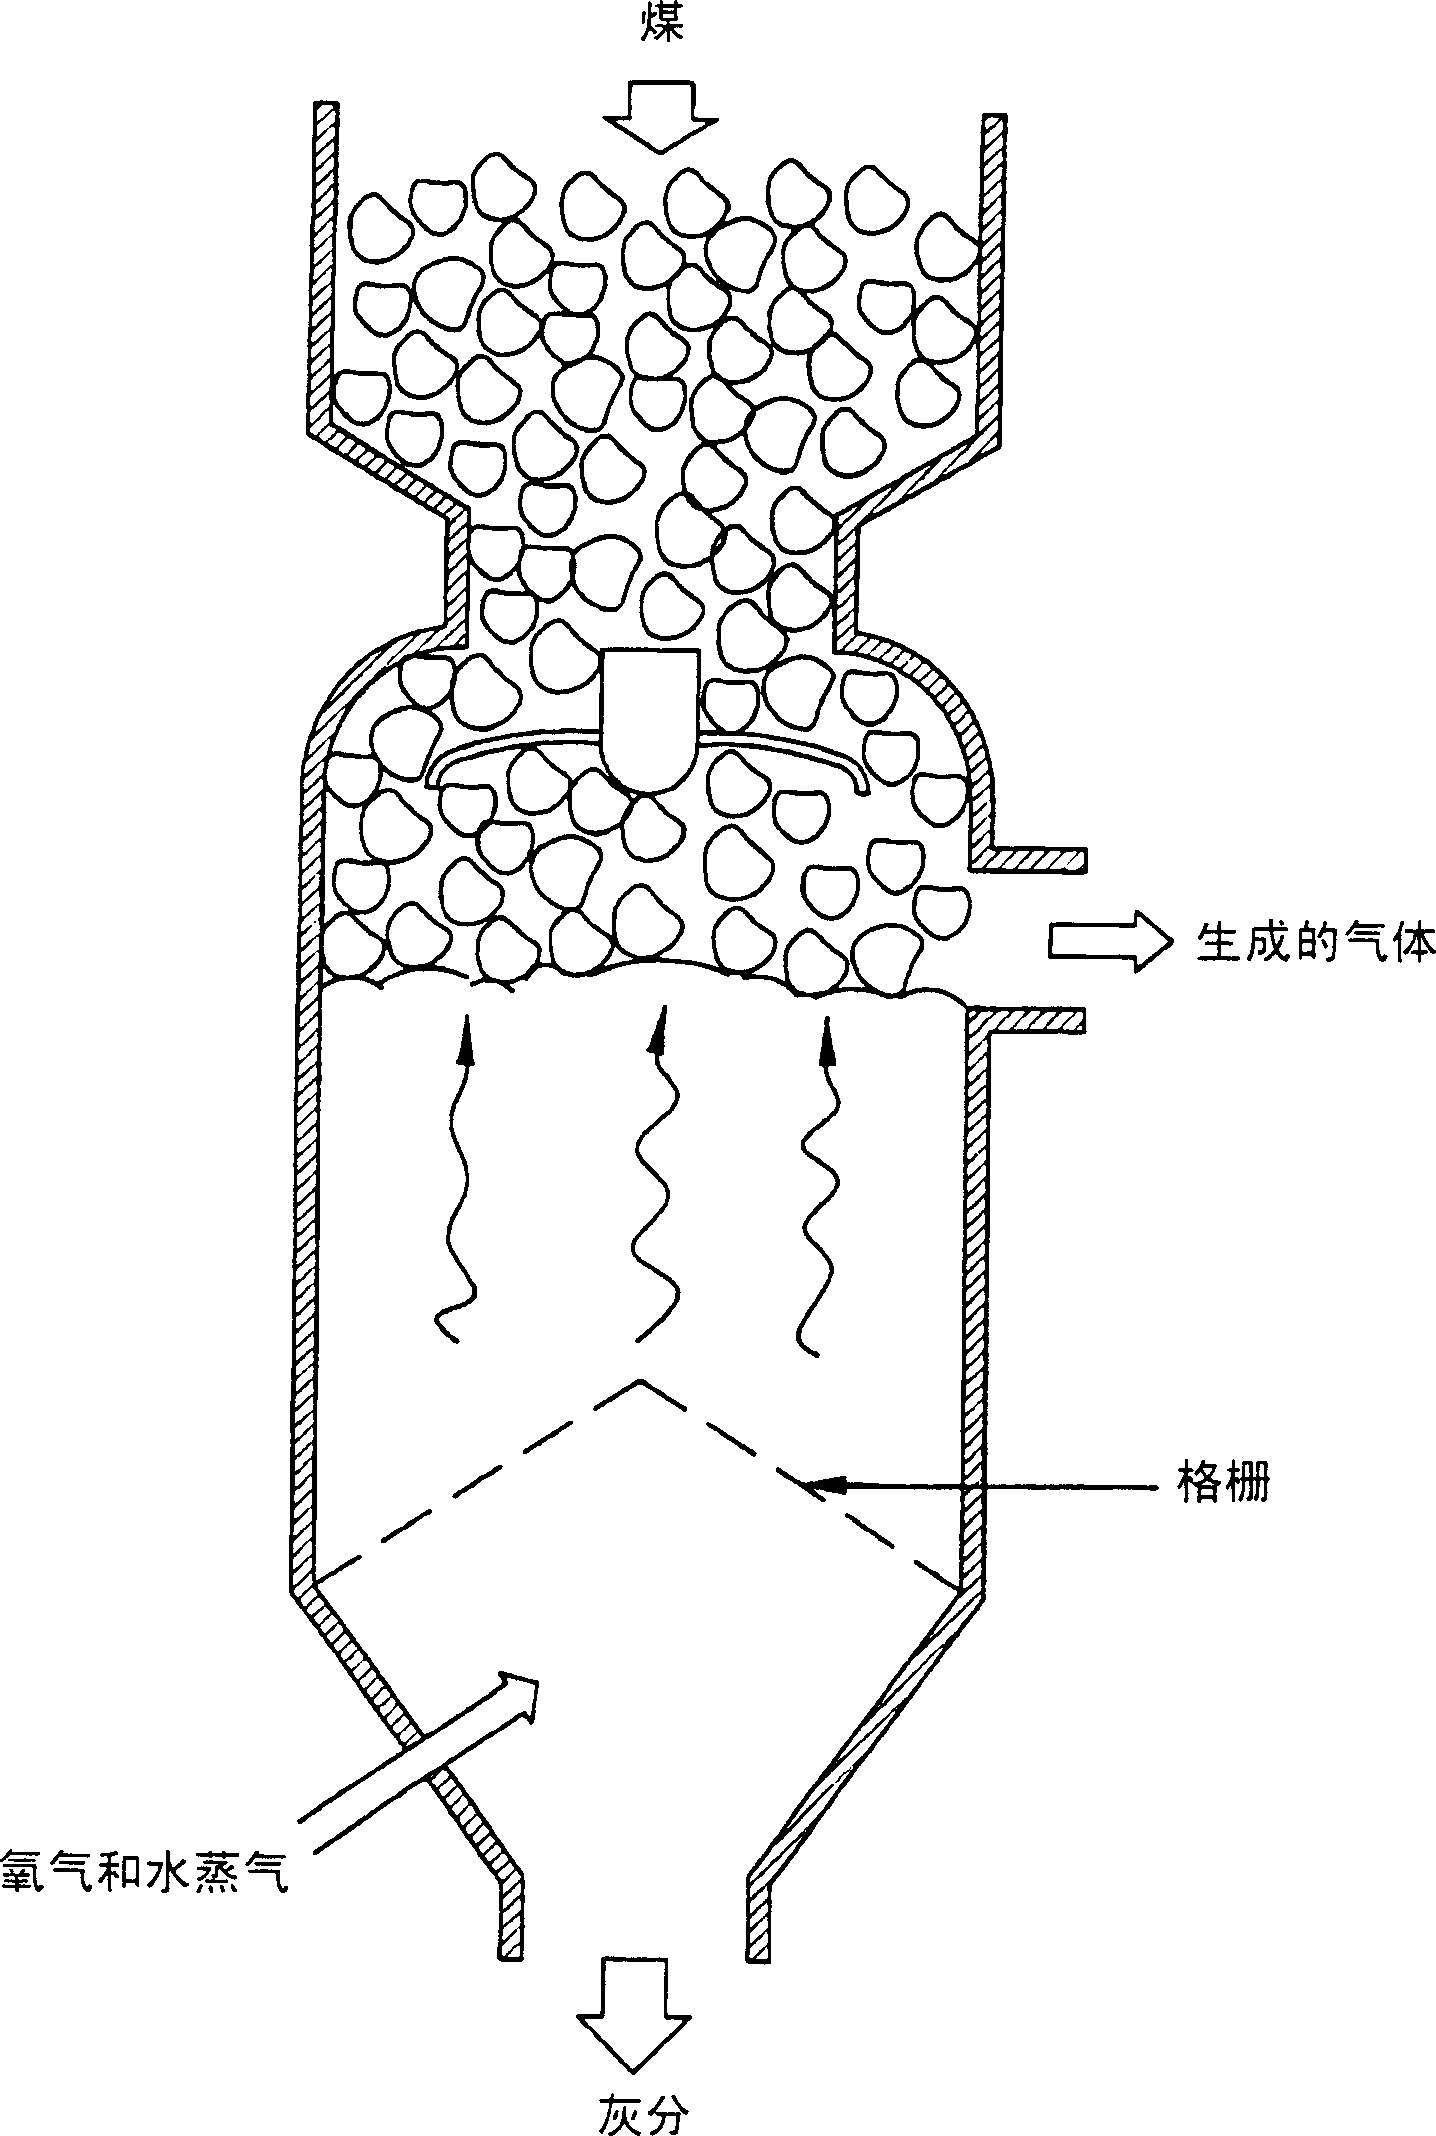 Method of gasifying carbonaceous material and apparatus therefor